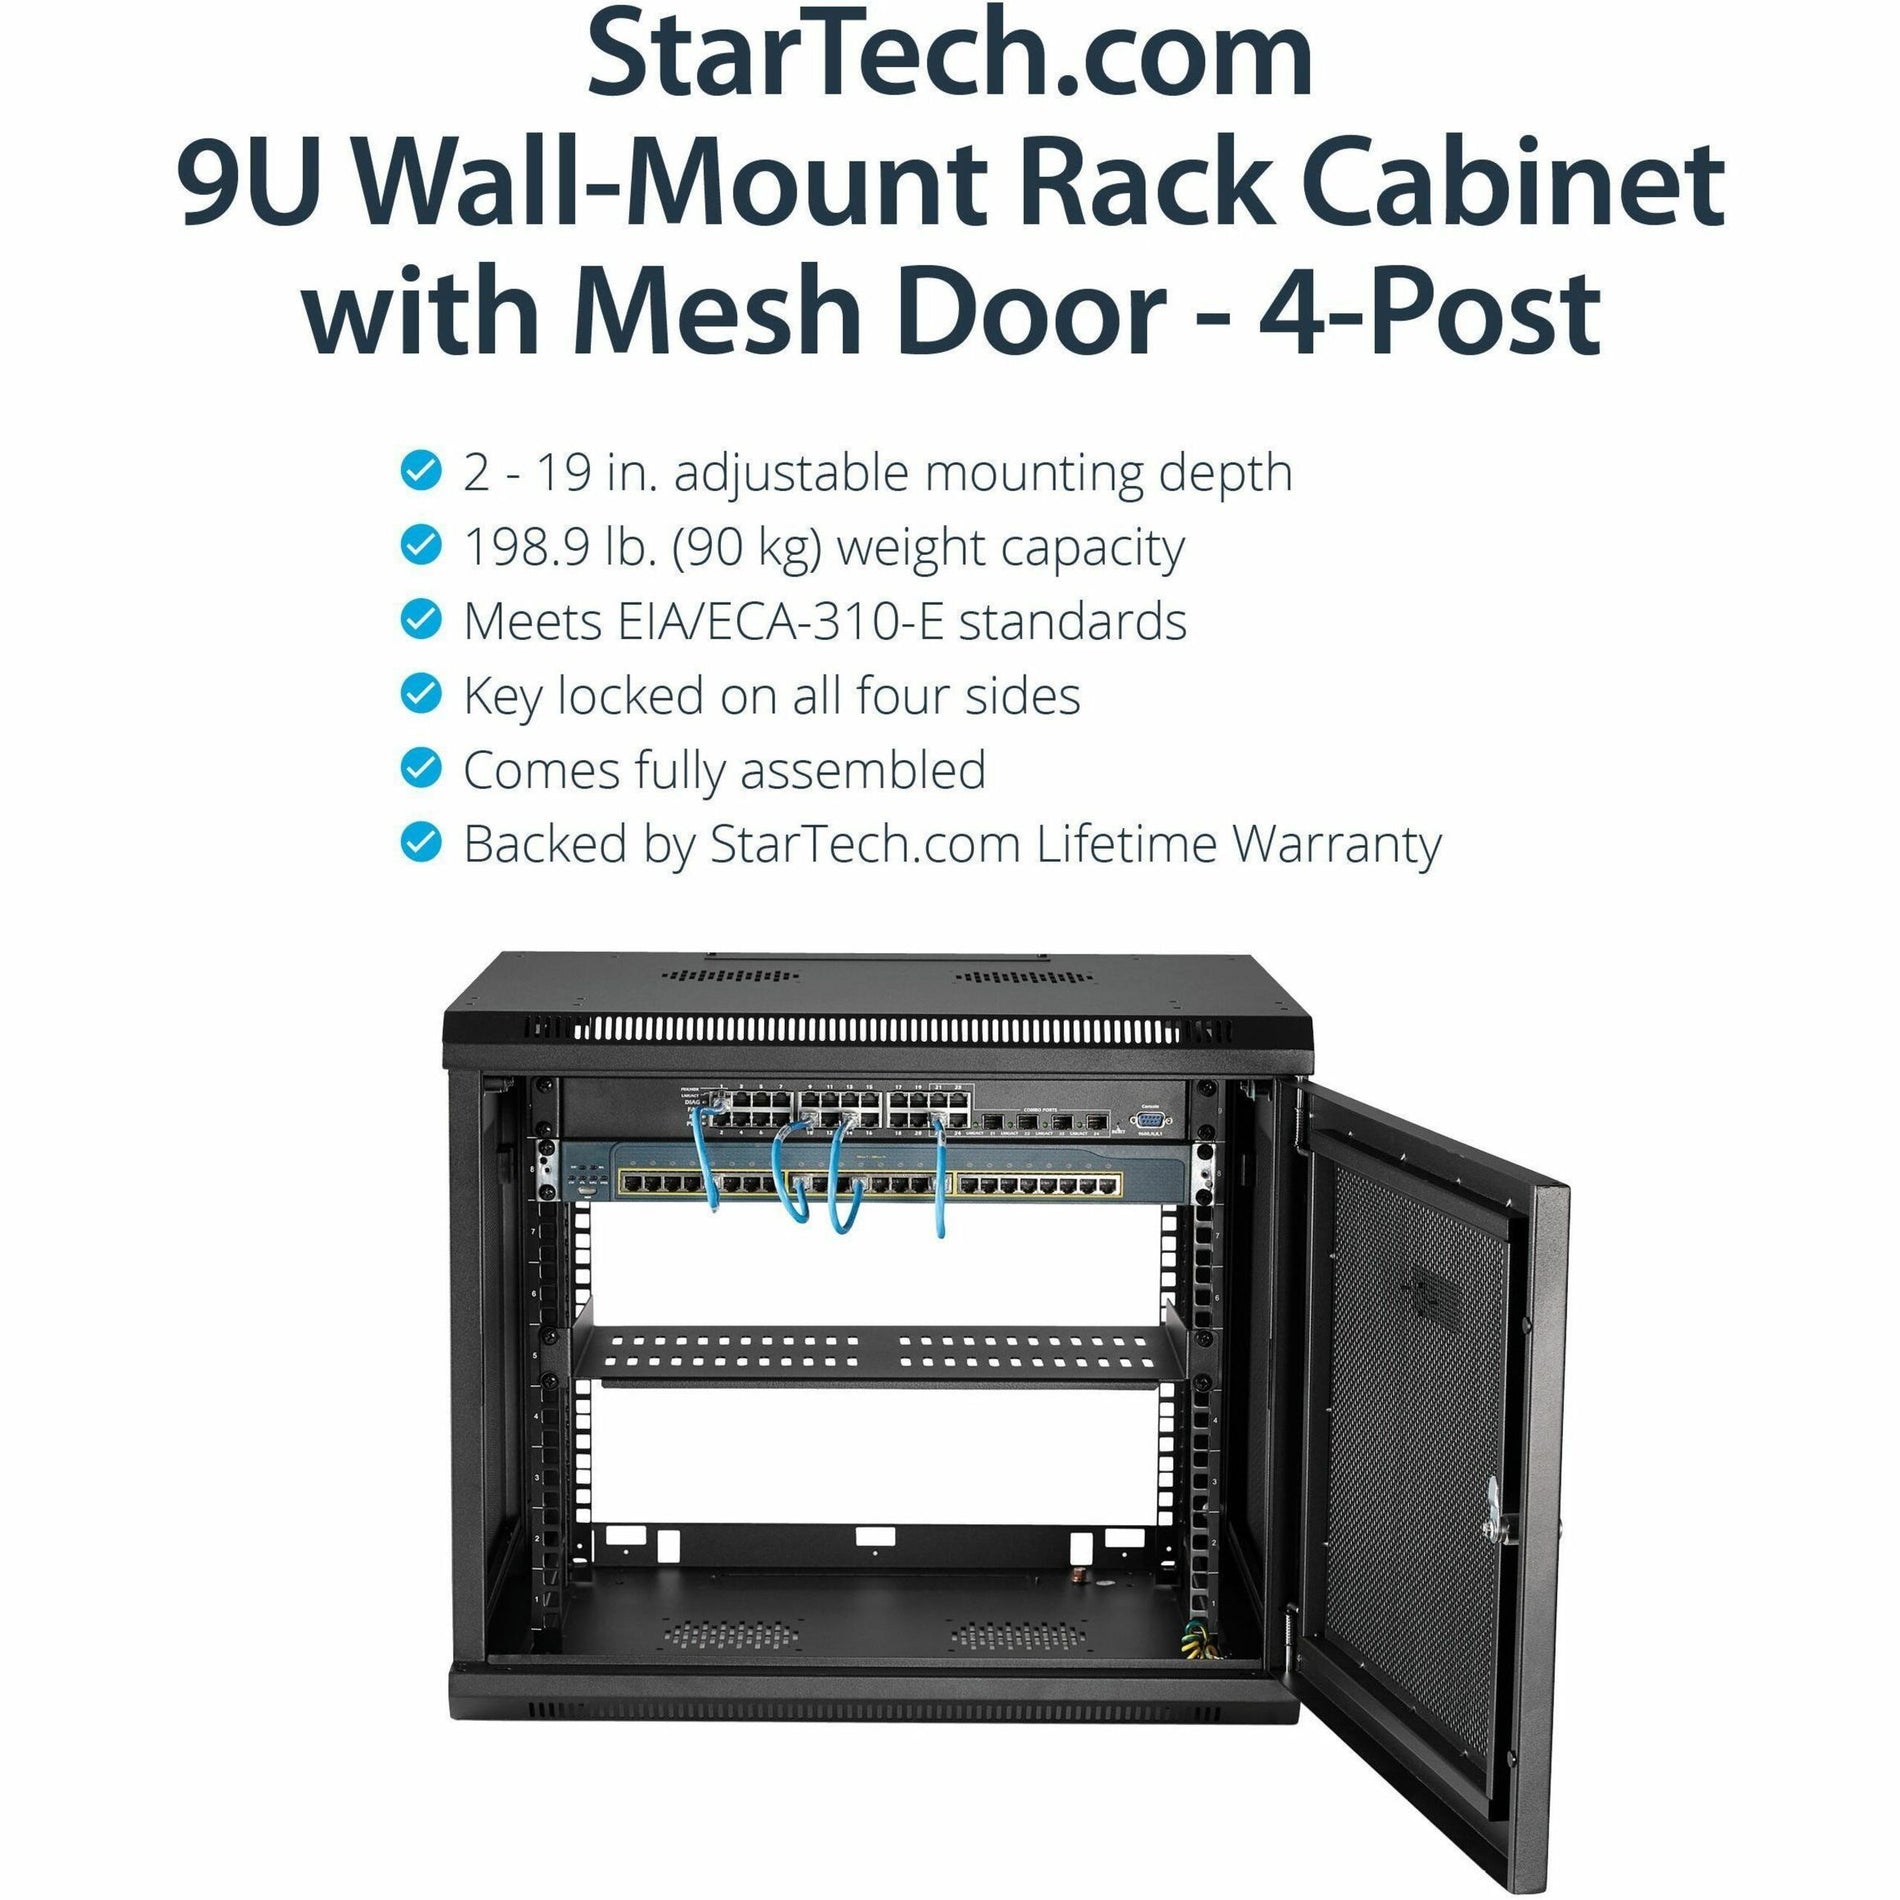 StarTech.com RK920WALM 9U Wall-Mount Server Rack Cabinet - Up to 20.8 in. Deep, Wall Mount Network Cabinet for LAN Switch, Patch Panel, Server